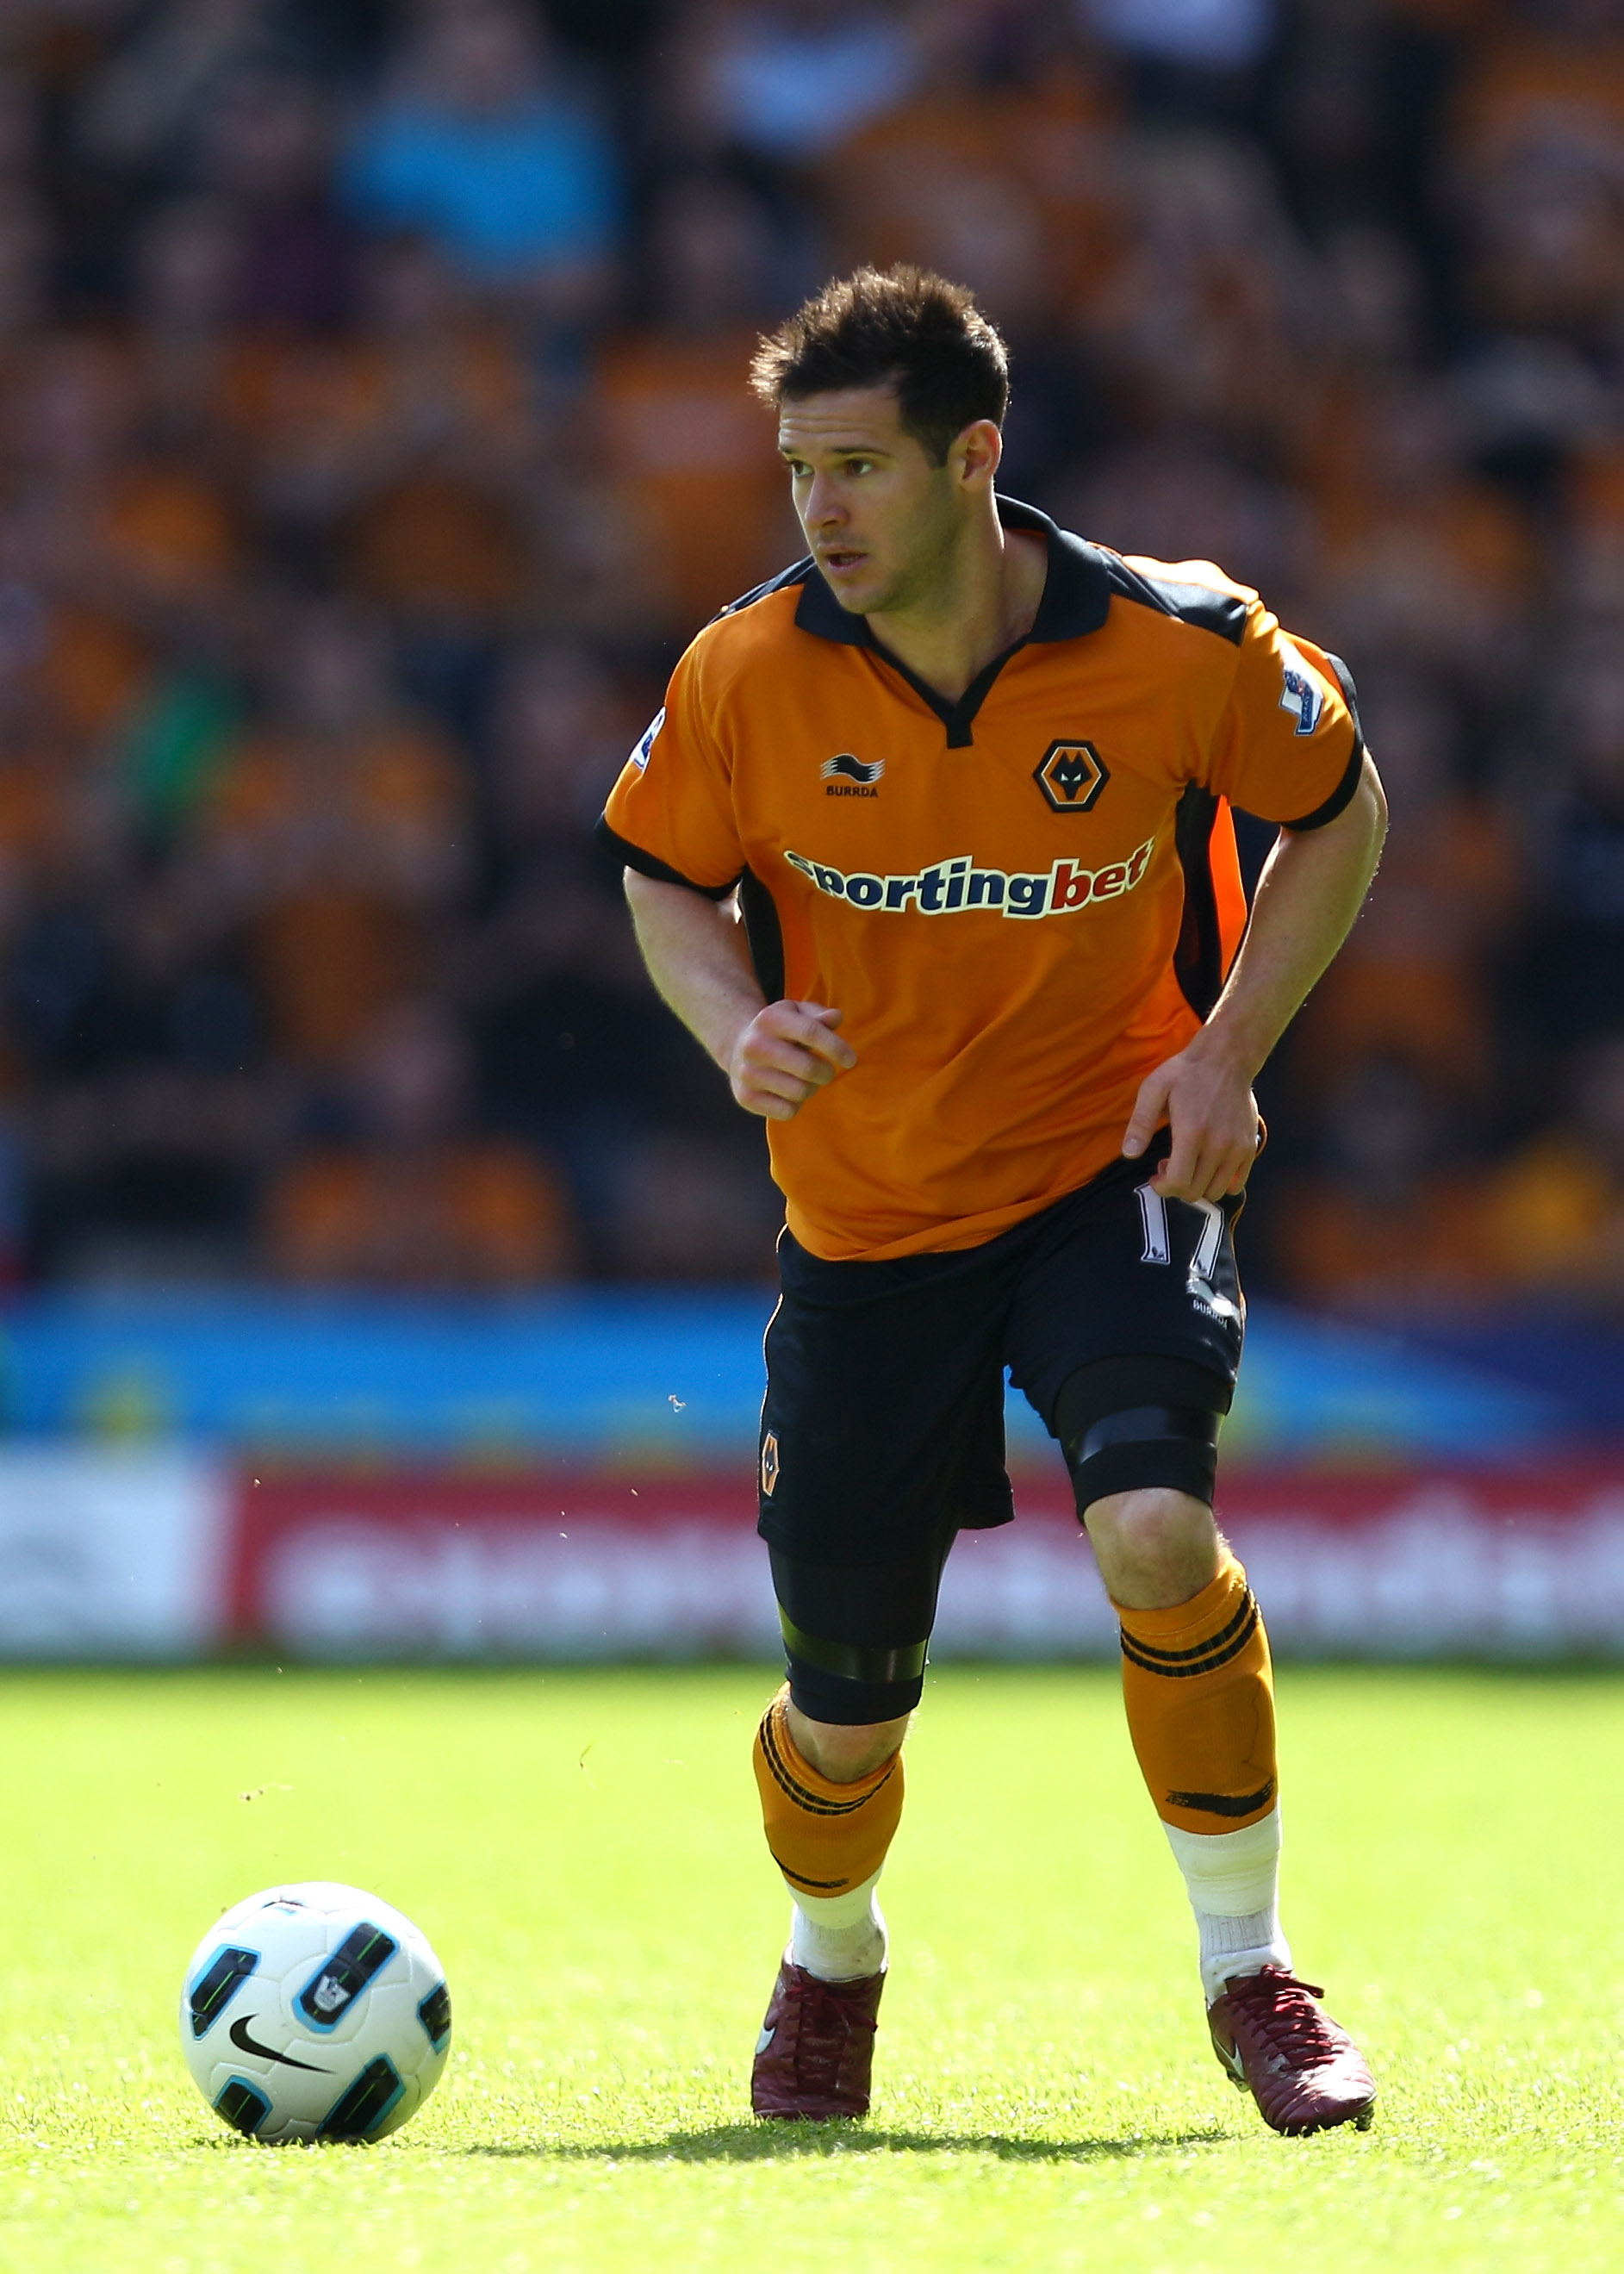 WOLVERHAMPTON, ENGLAND - APRIL 09:  Matt Jarvis of Wolves in action during the Barclays Premier League match between Wolverhampton Wanderers and Everton at Molineux on April 9, 2011 in Wolverhampton, England.  (Photo by Richard Heathcote/Getty Images)